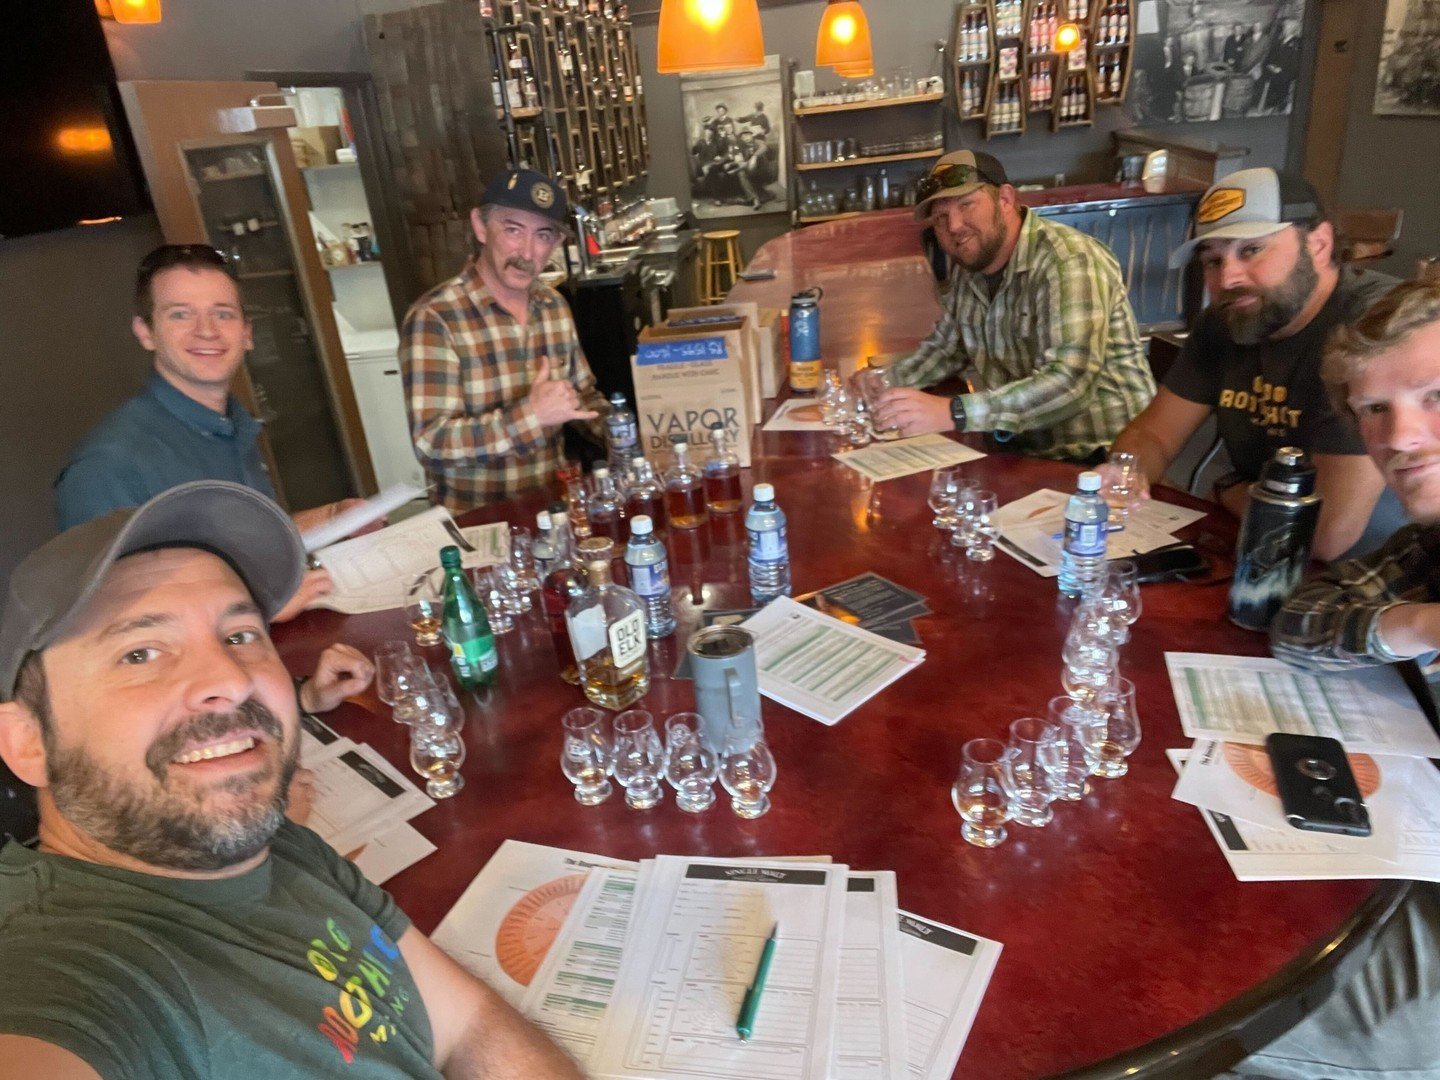 Last week, our @rootshootspirits team had a great time hanging out with our pals from @thestanleyvault tasting and nosing through barrels @vapordistillery in Boulder. We had a tasting session where we explored and savored 26 barrels of Root Shoot Ame